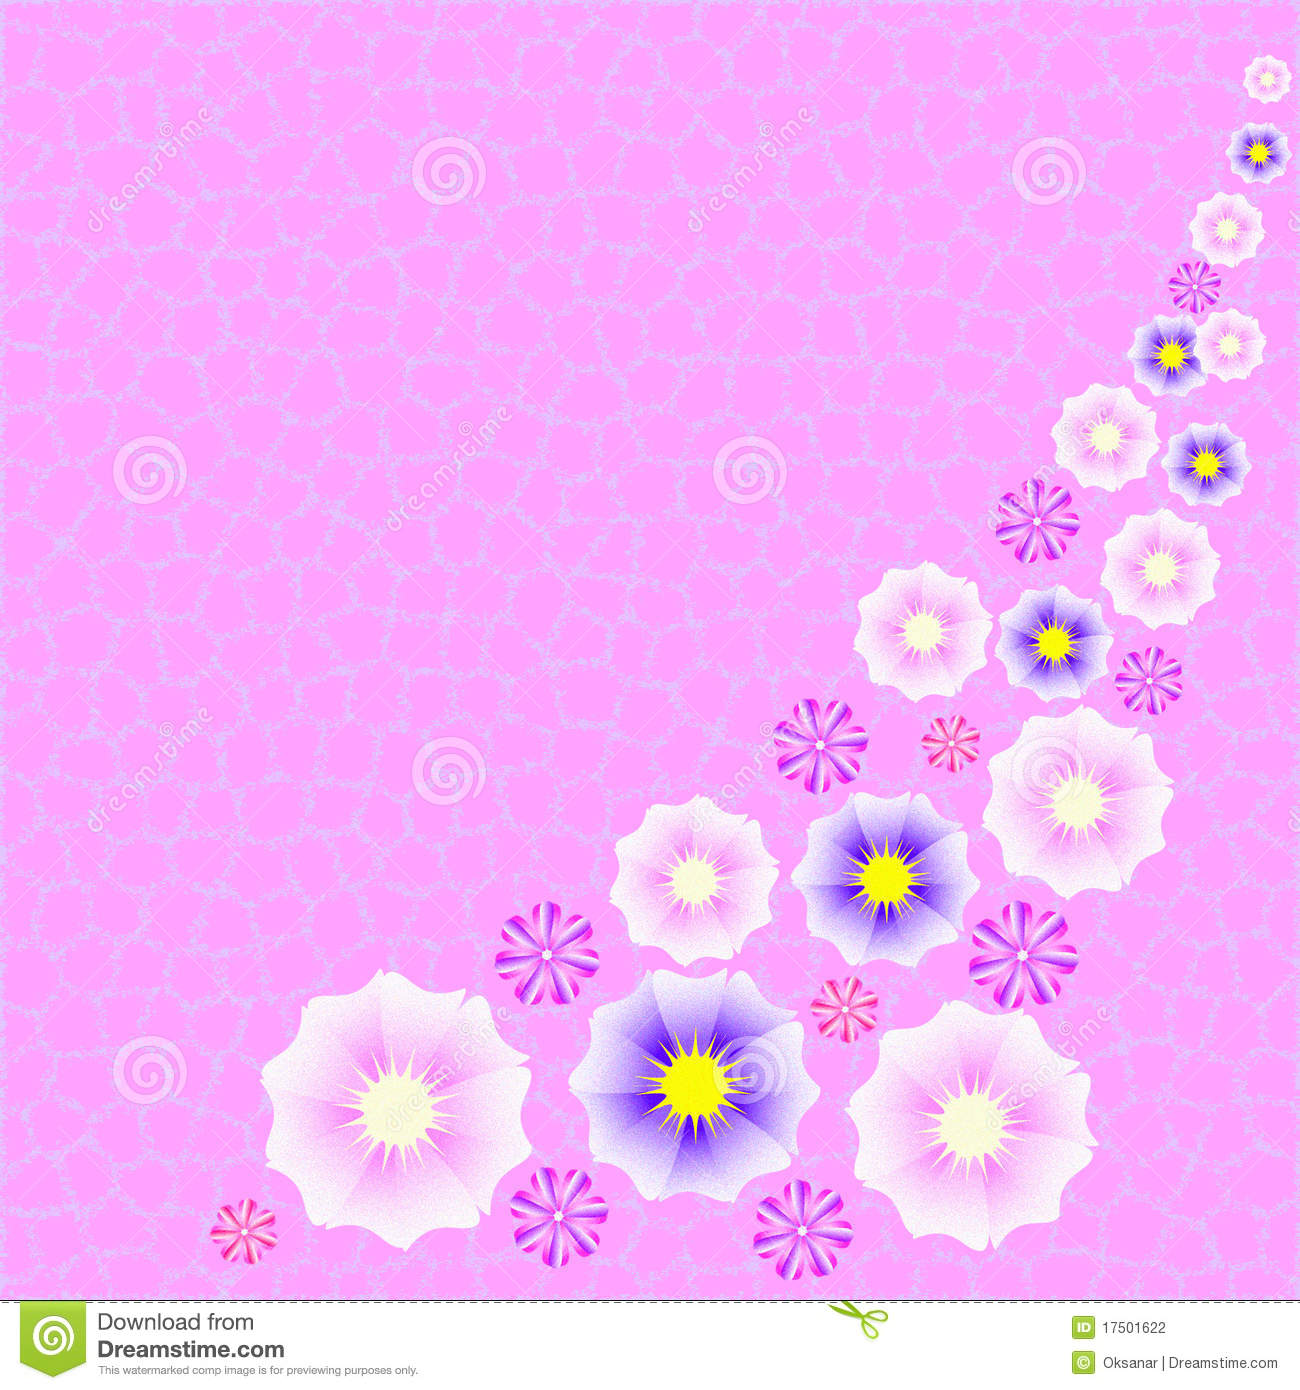 Pink Fuzzy Floral Background Stock Photography   Image  17501622